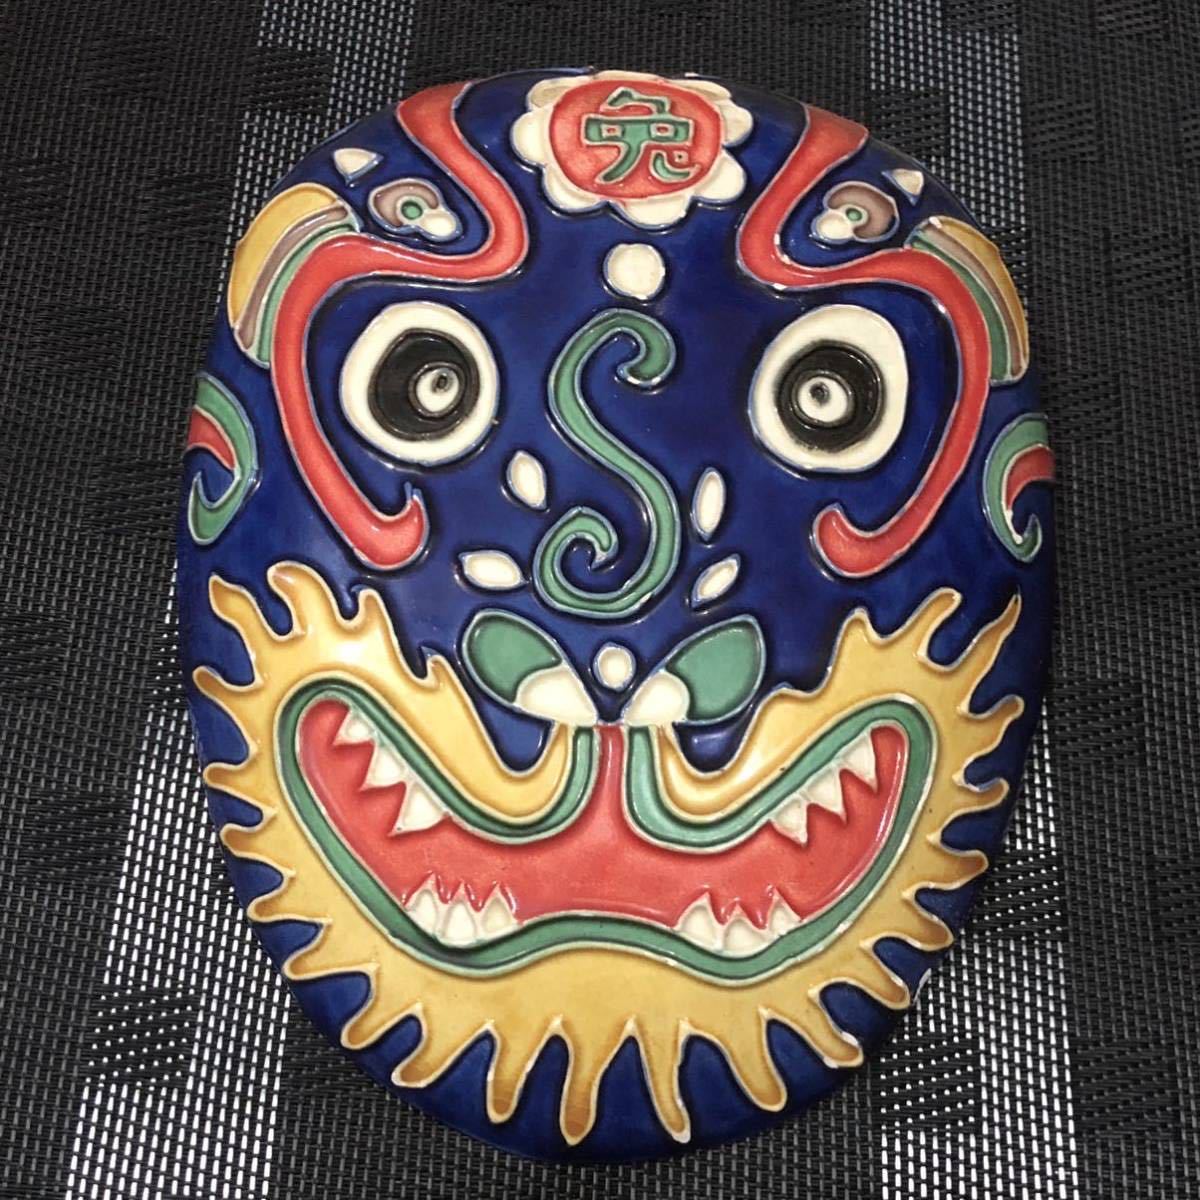 [ prompt decision / free shipping ] China change surface manner decoration ceramics made surface decoration change surface show capital . hand made folkcraft goods abroad earth production interior miscellaneous goods ornament used scratch equipped 